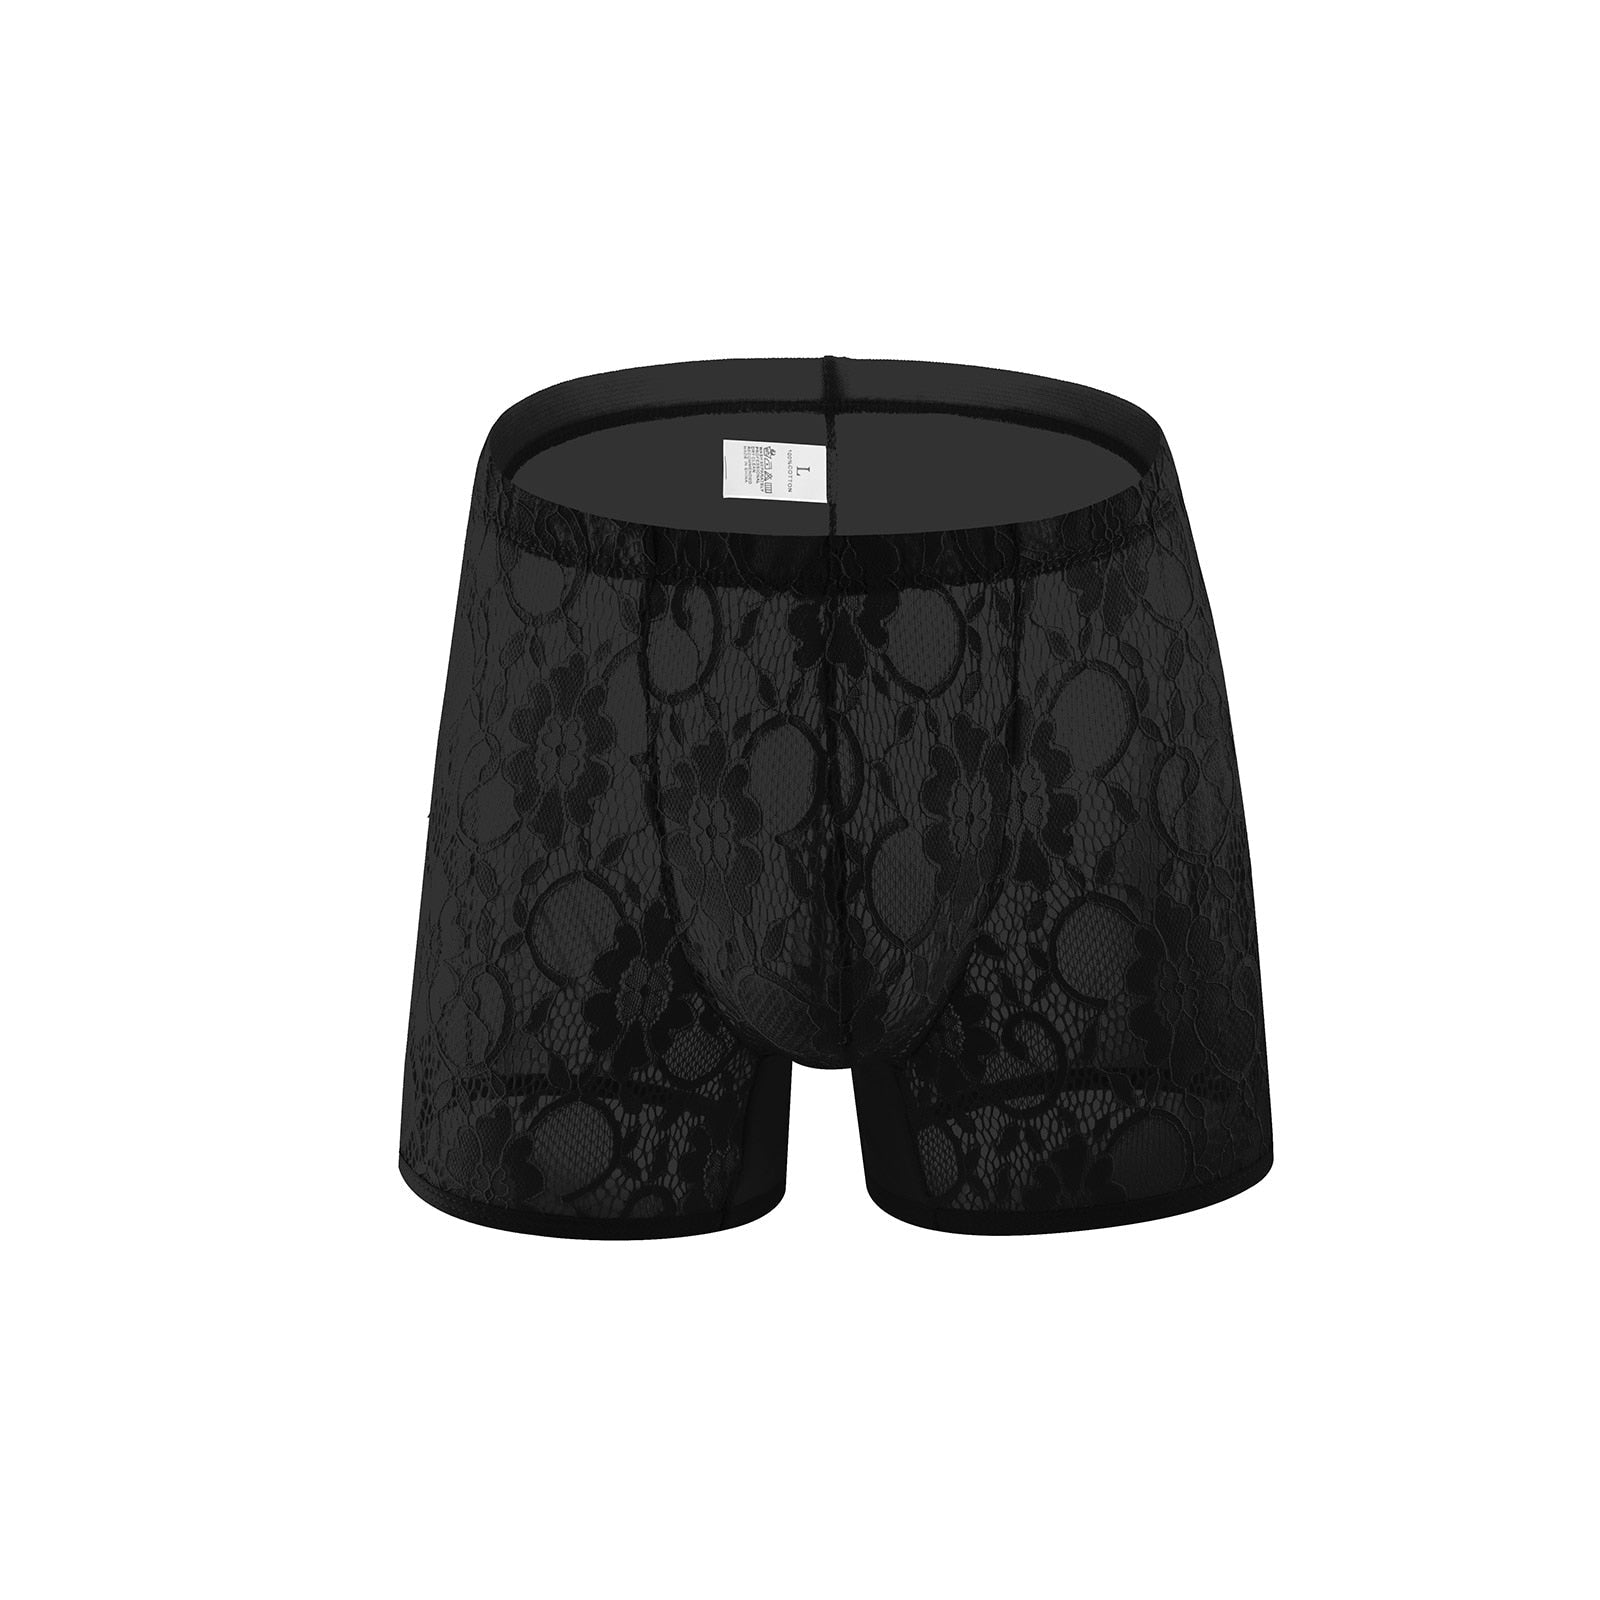 SHEER Lace Boxers 5-Pack